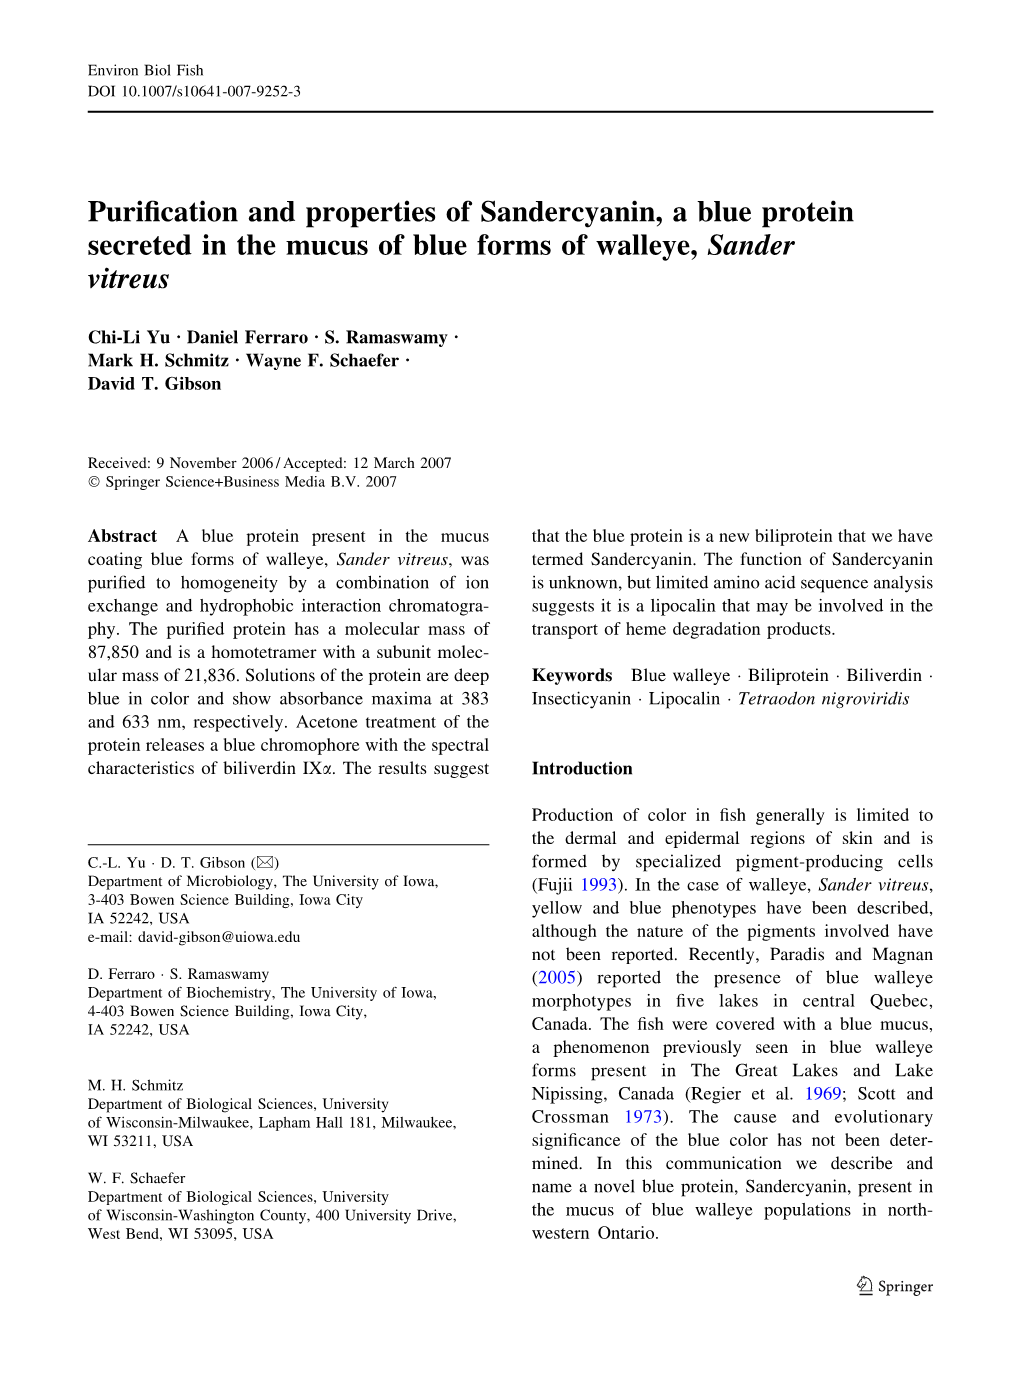 Purification and Properties of Sandercyanin, A